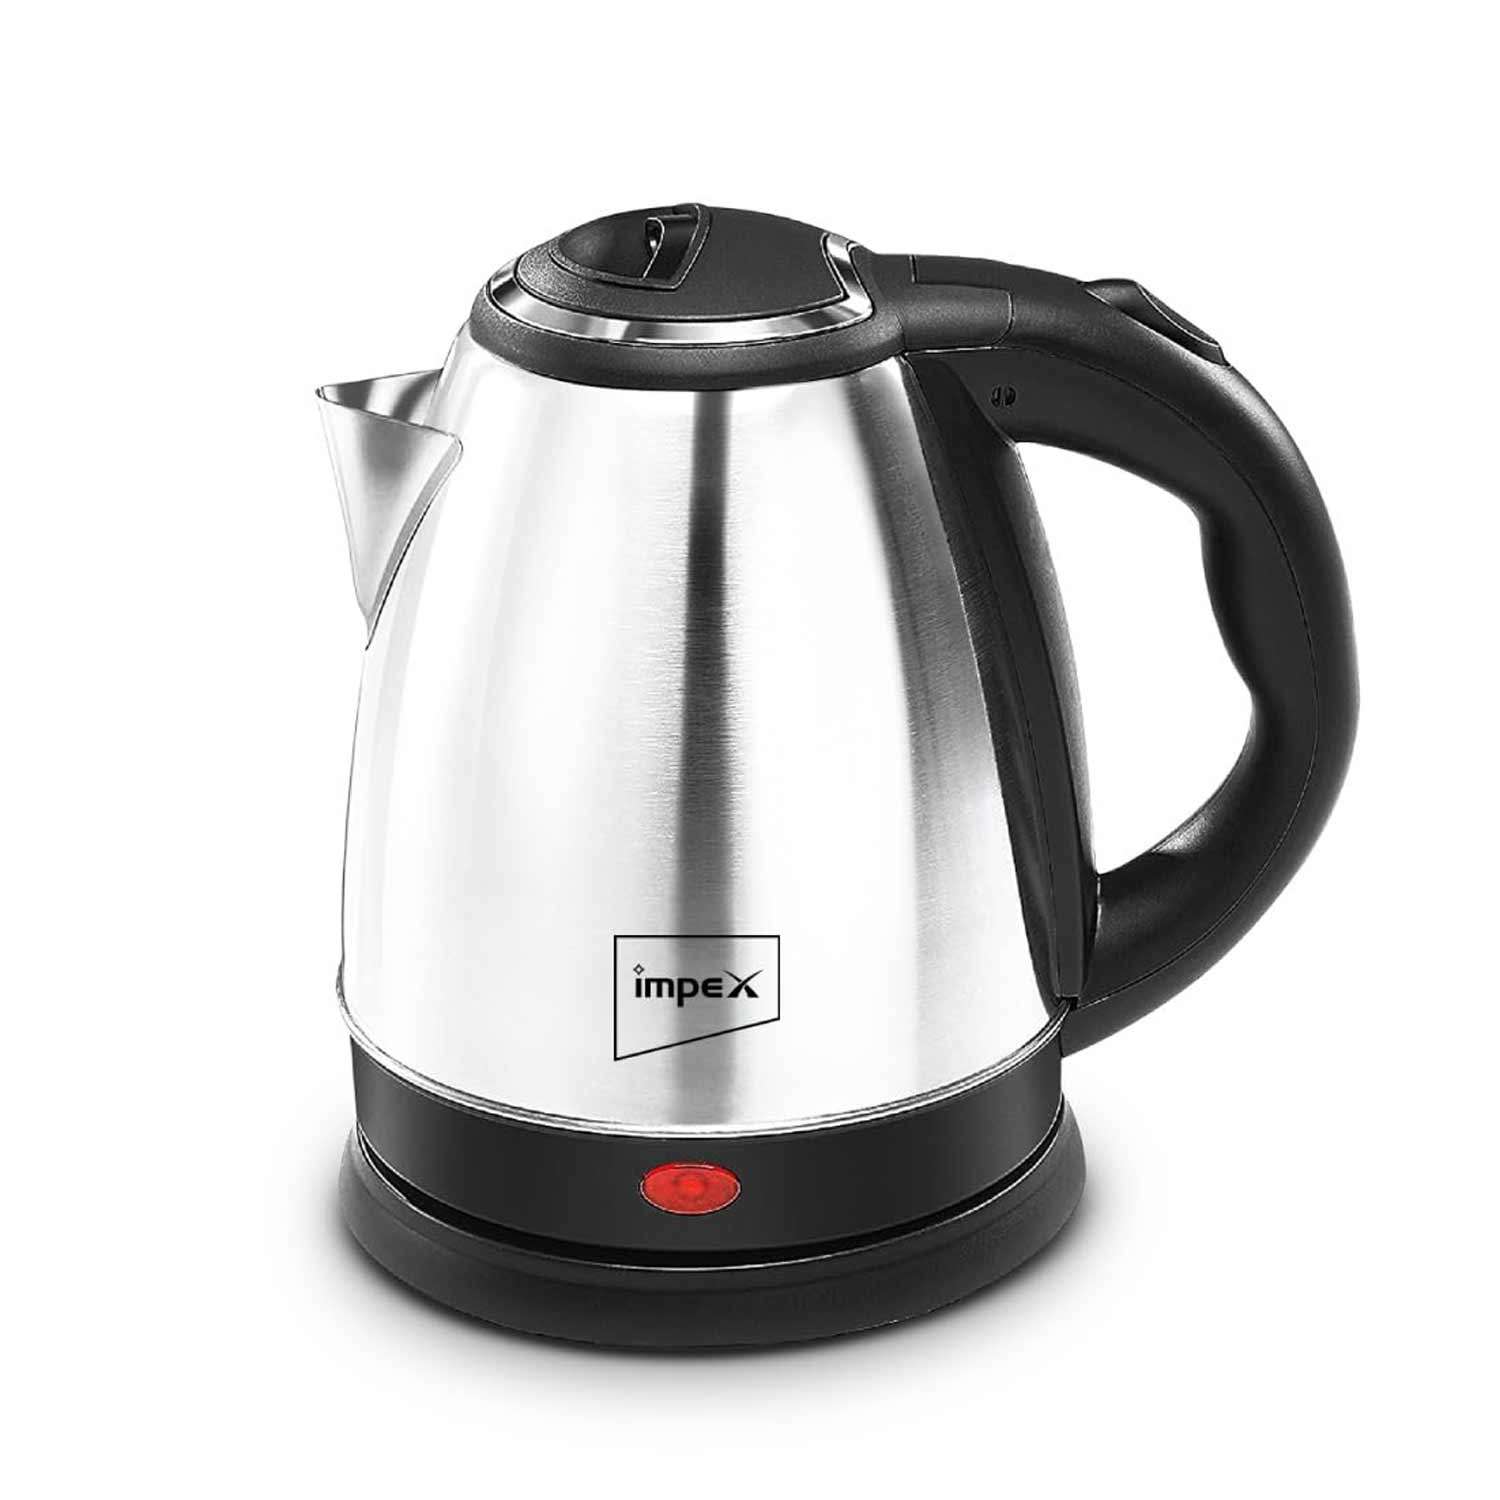 Impex STEAMER-1501 Stainless Steel Electric Kettle (1.5 Litre,1500 Watts,Silver)